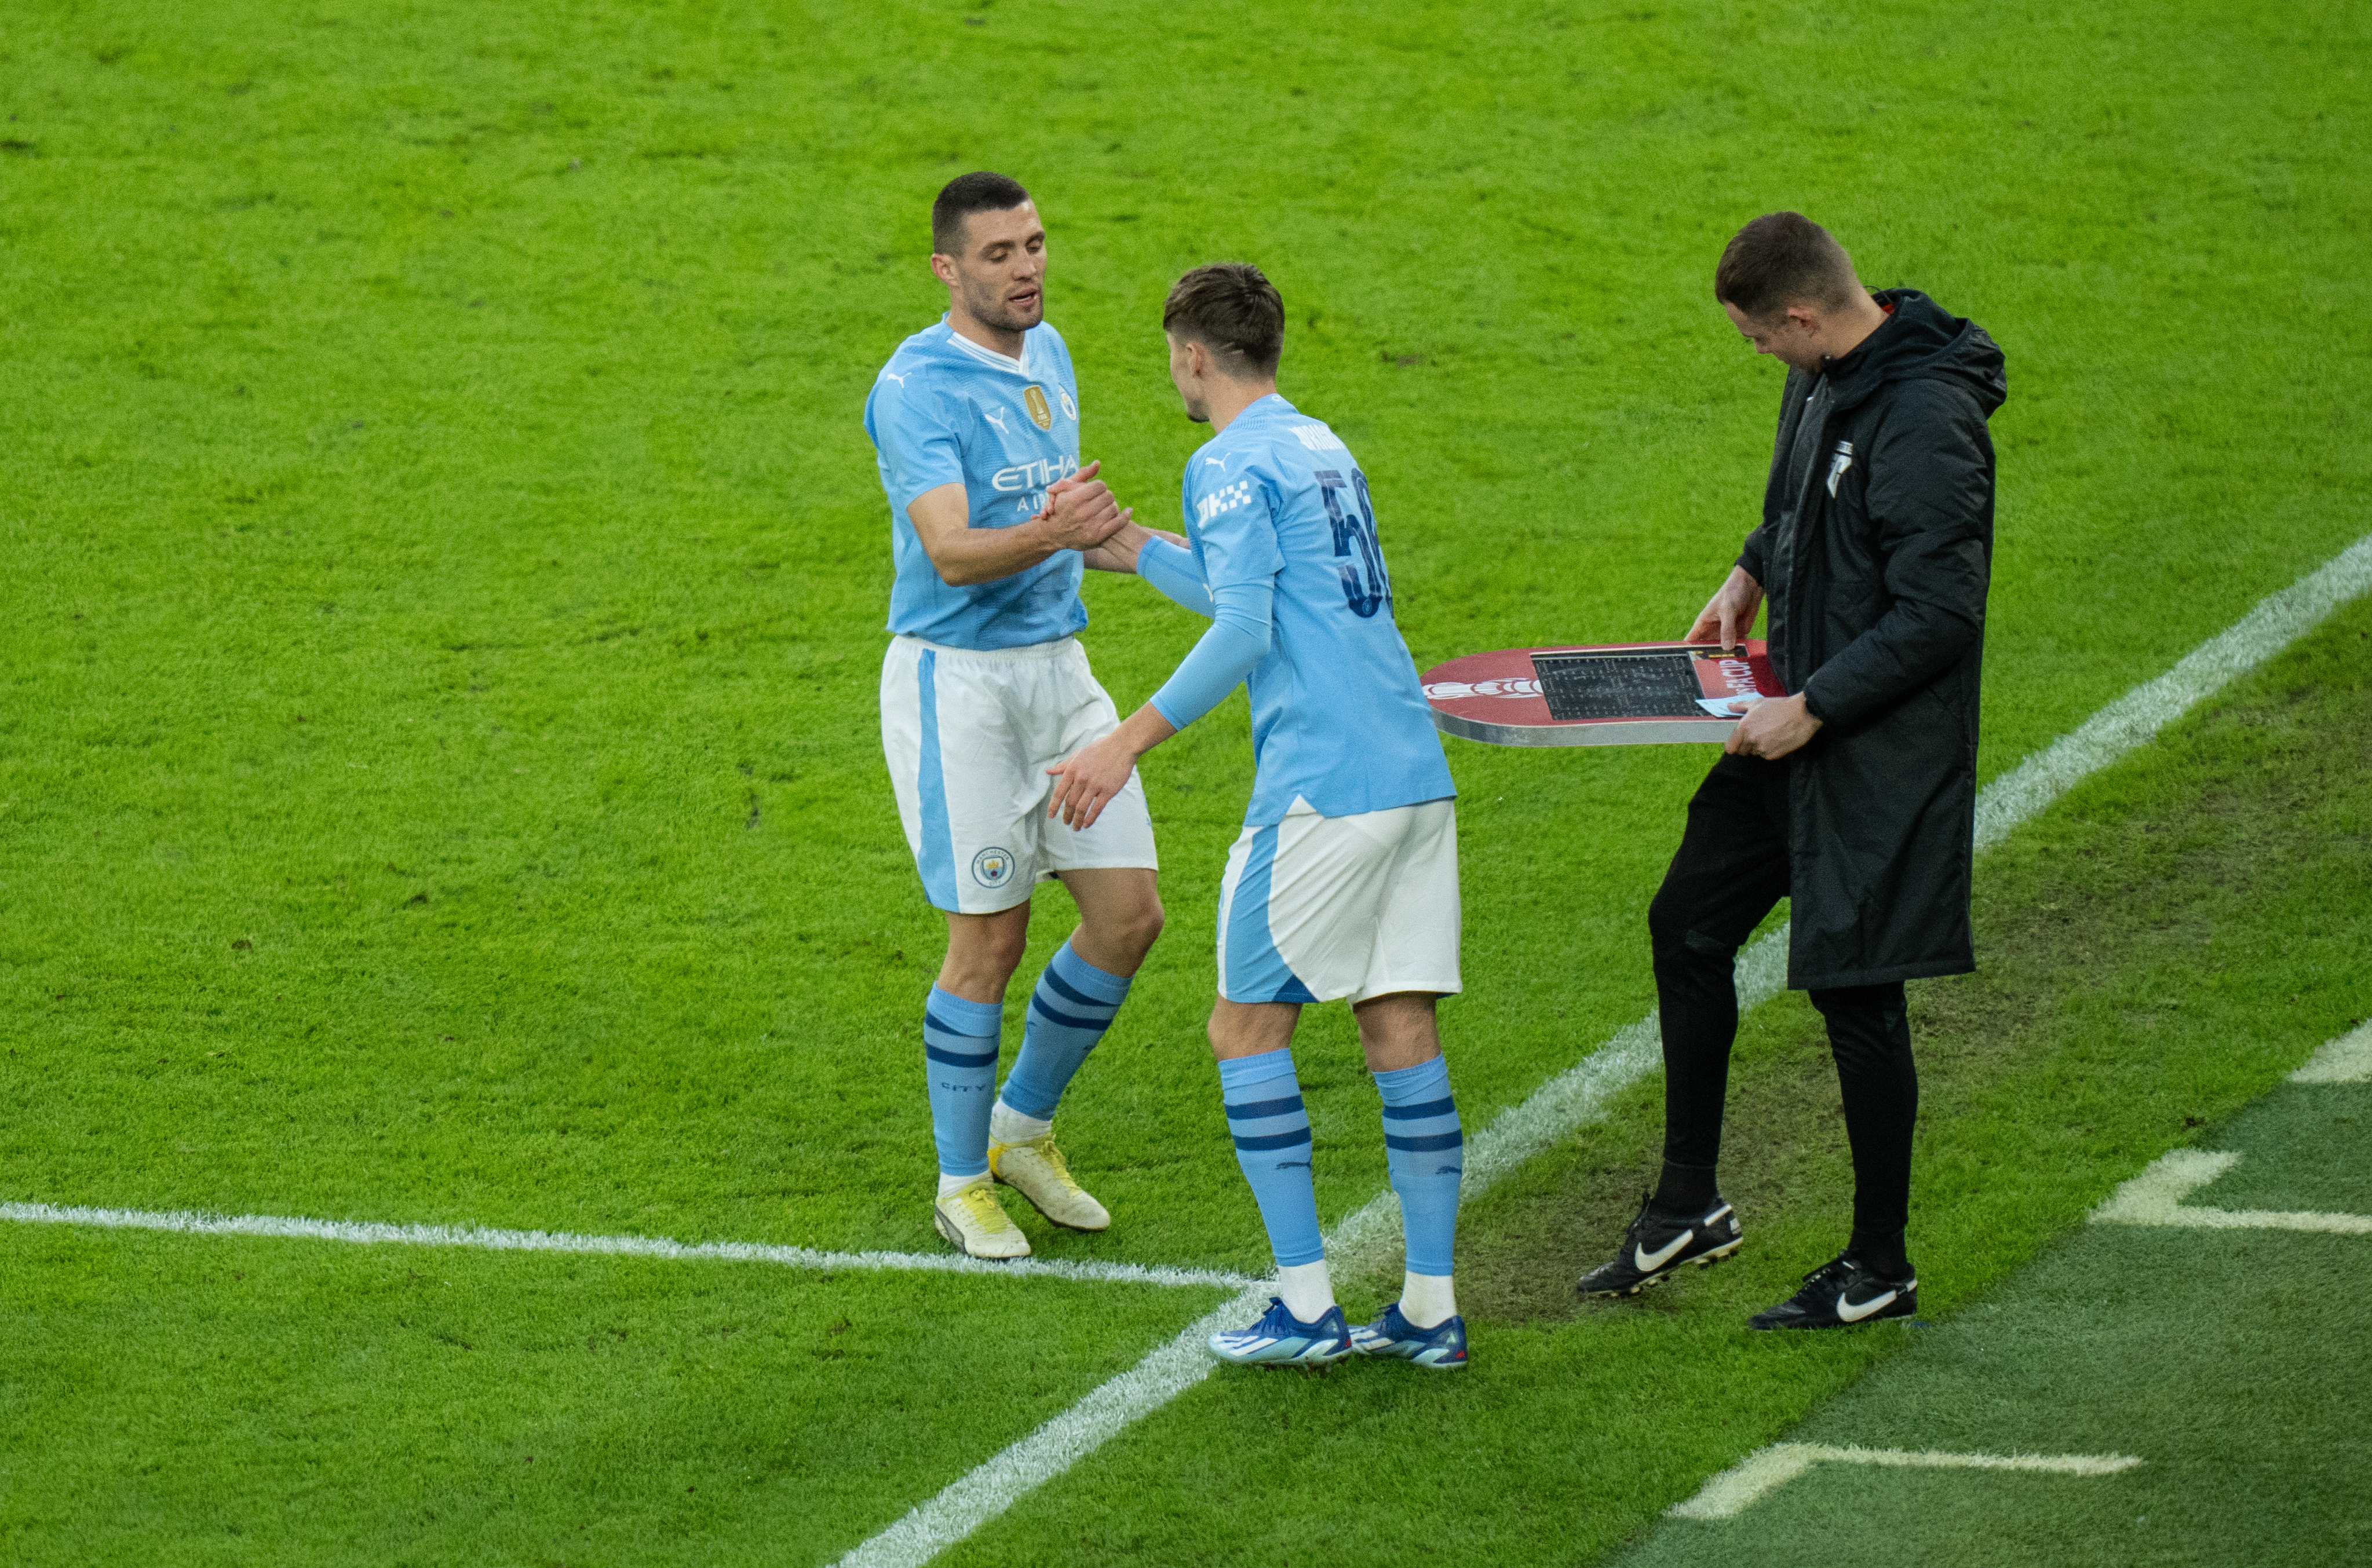 SENIOR BOW: Jacob Wright receives a handshake from Mateo Kovacic as he comes on for his City first team debut.